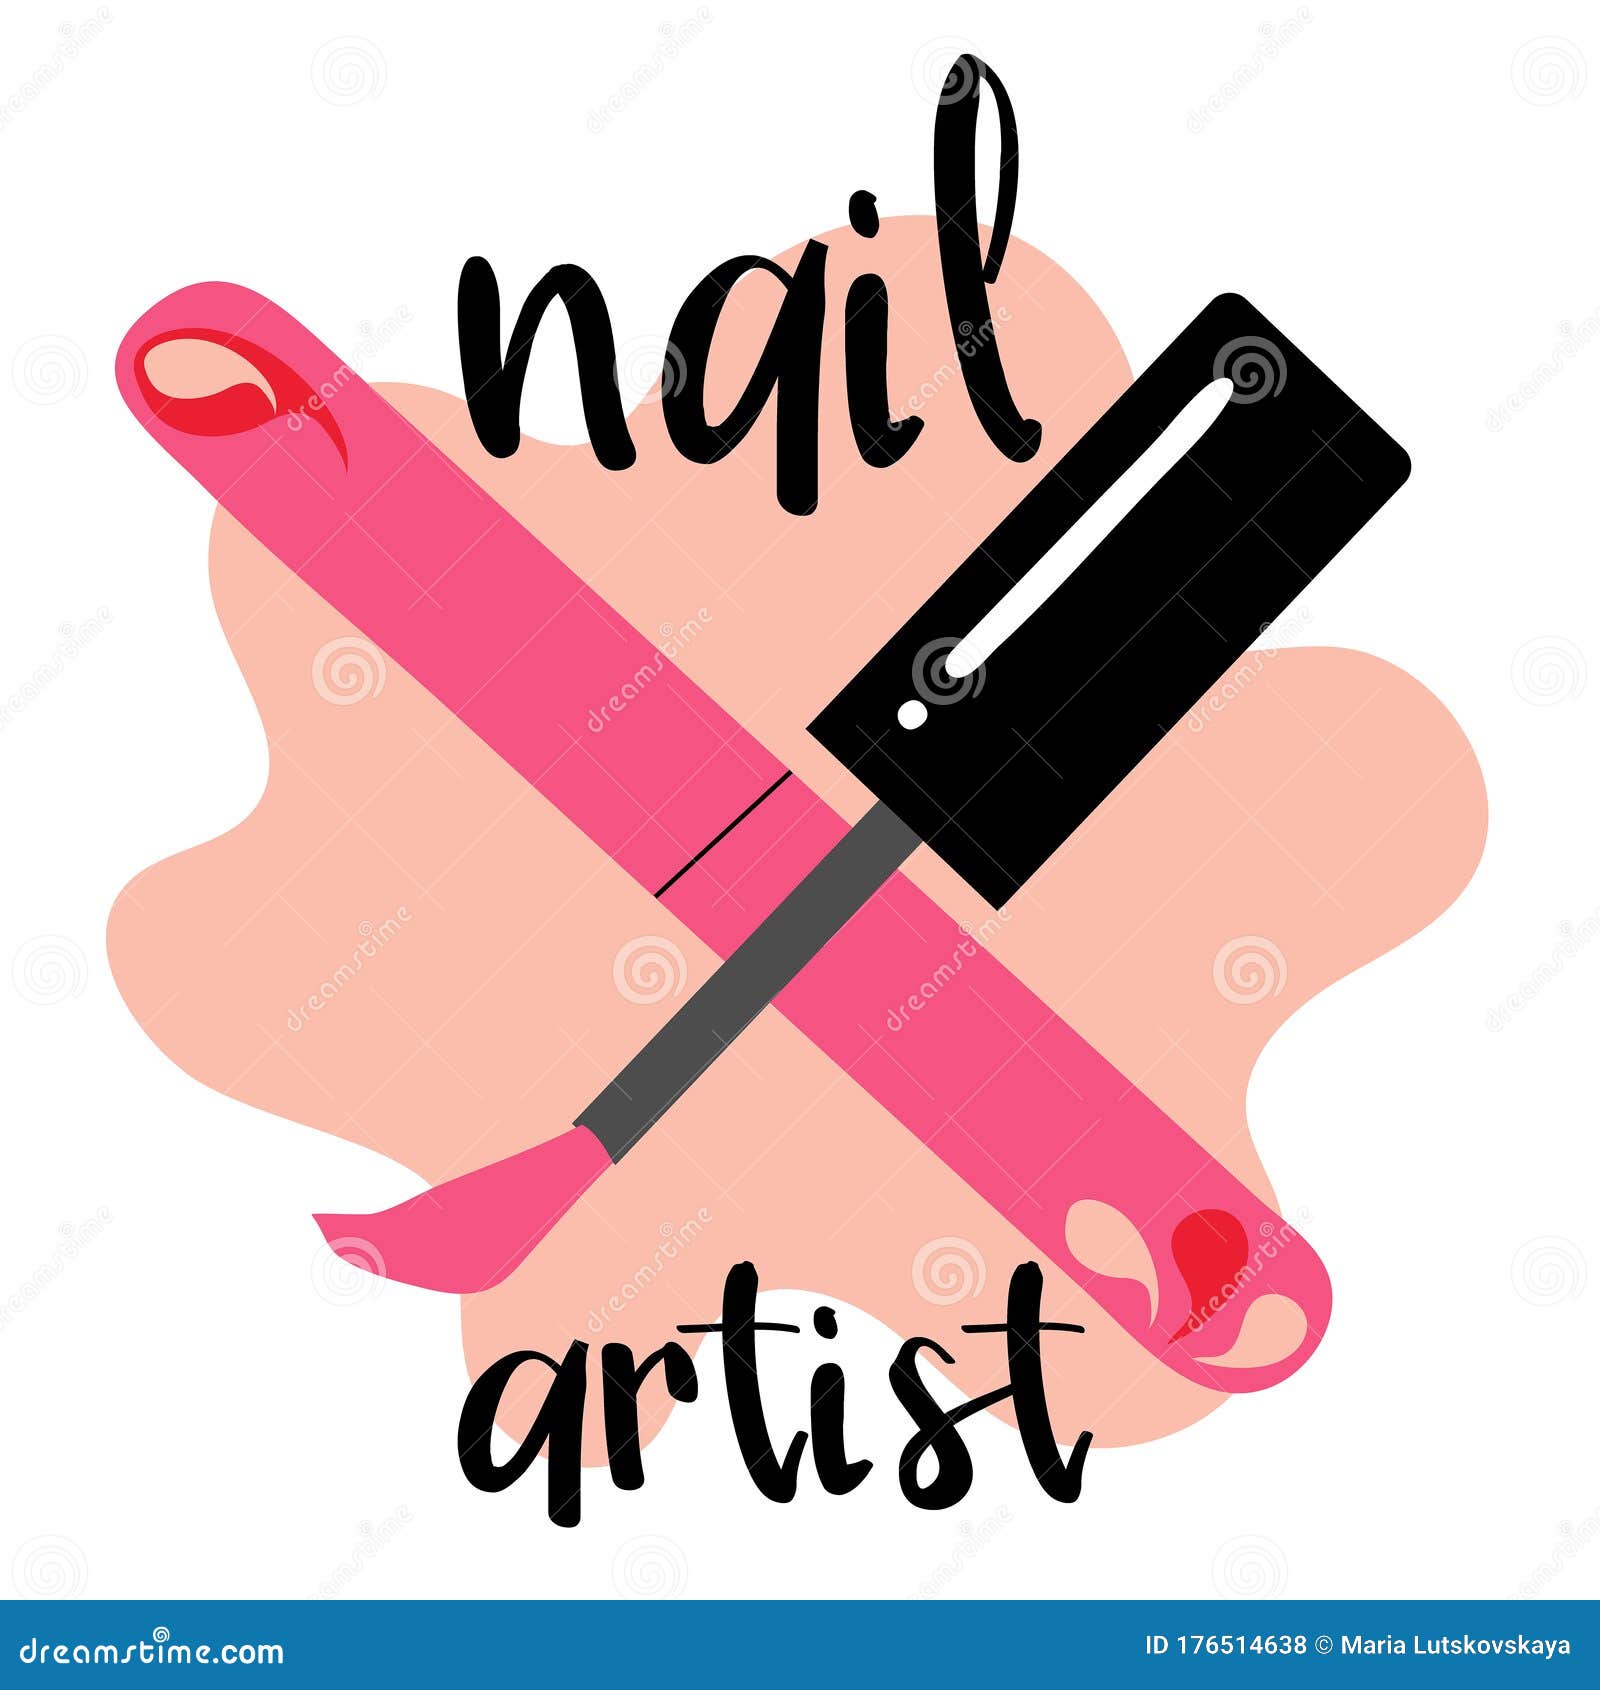 92 Nail Salon High Res Illustrations - Getty Images